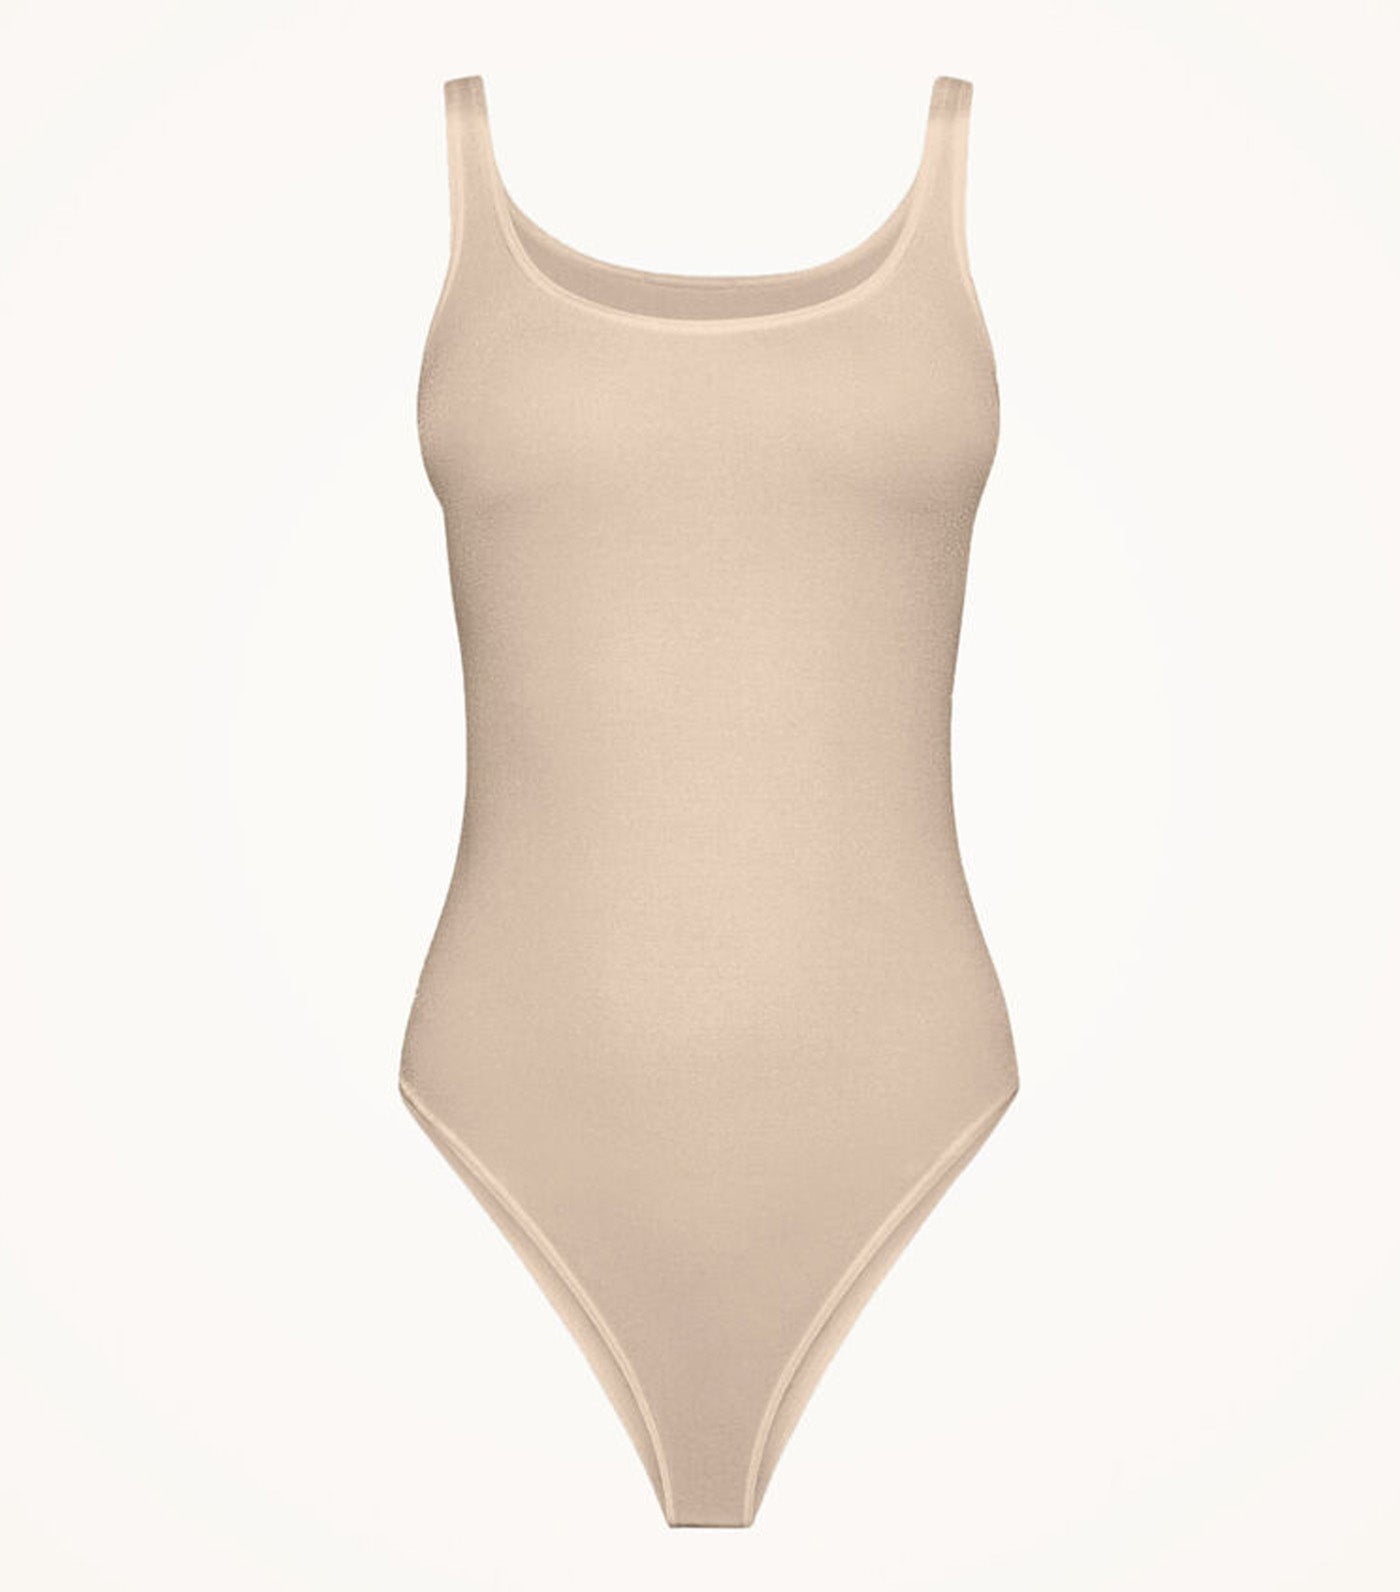 Wolford body suit long - Gem